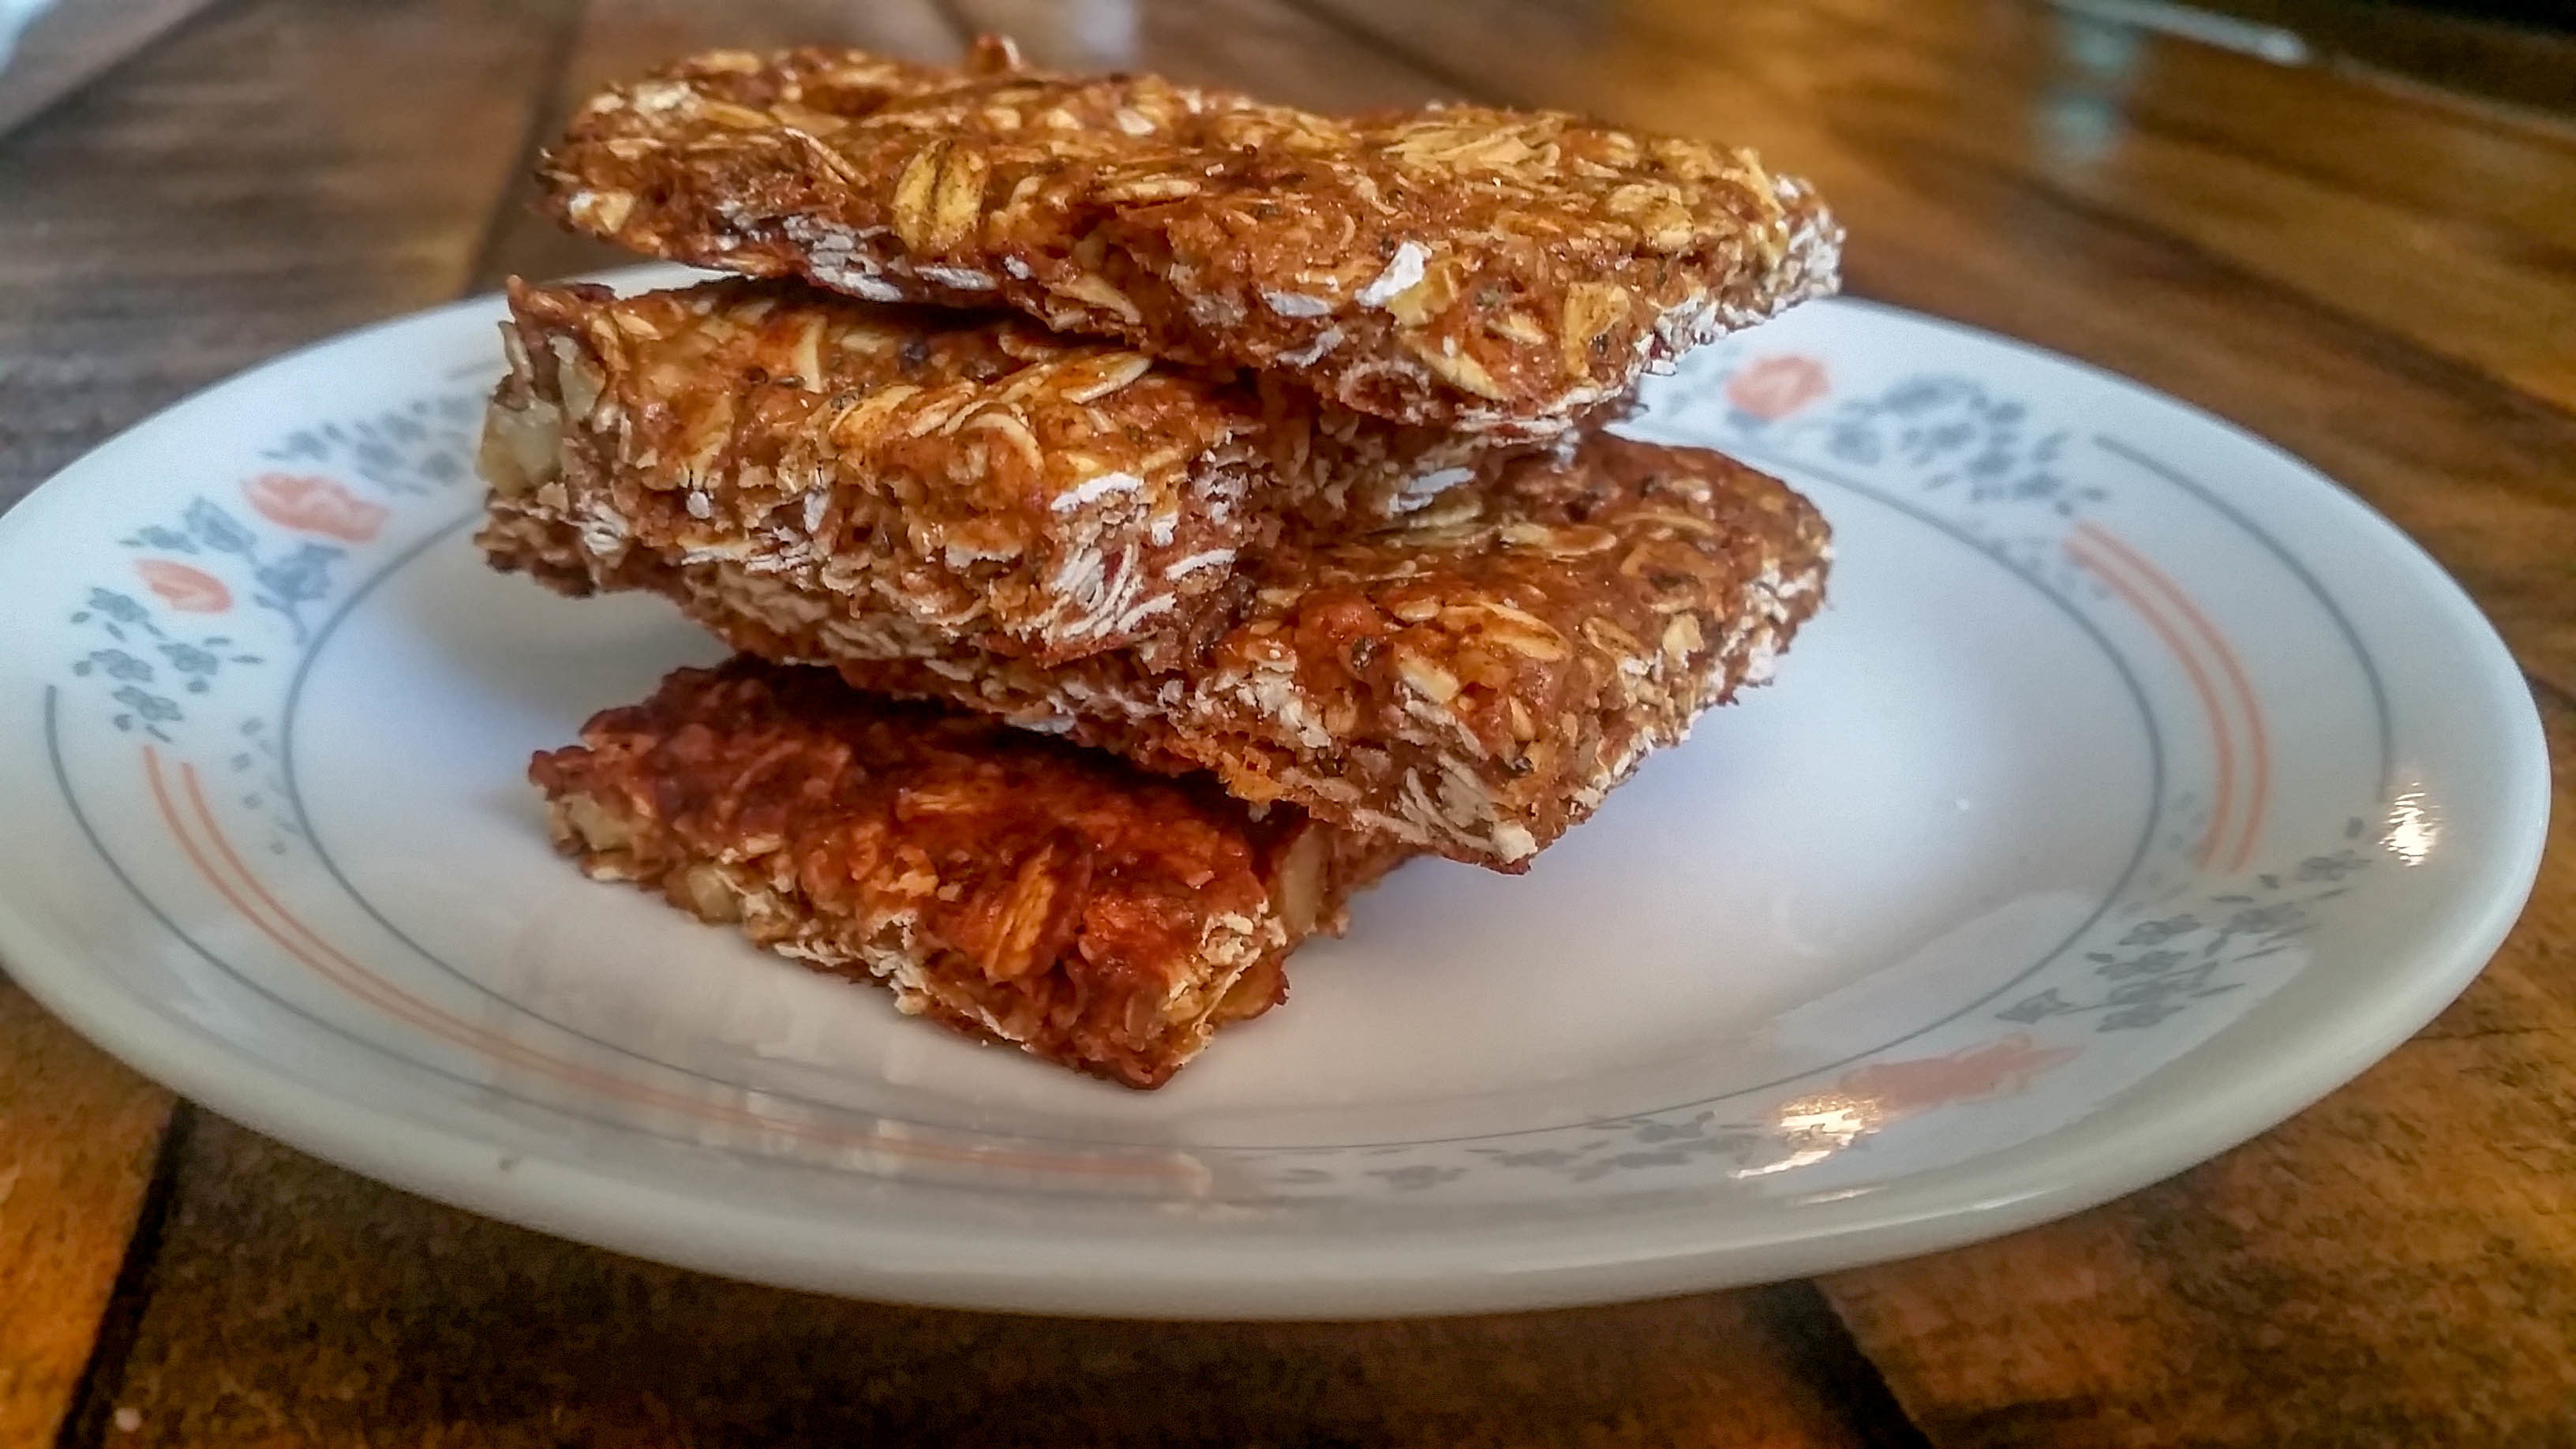 Detox 21: The End and Homemade Granola Bars